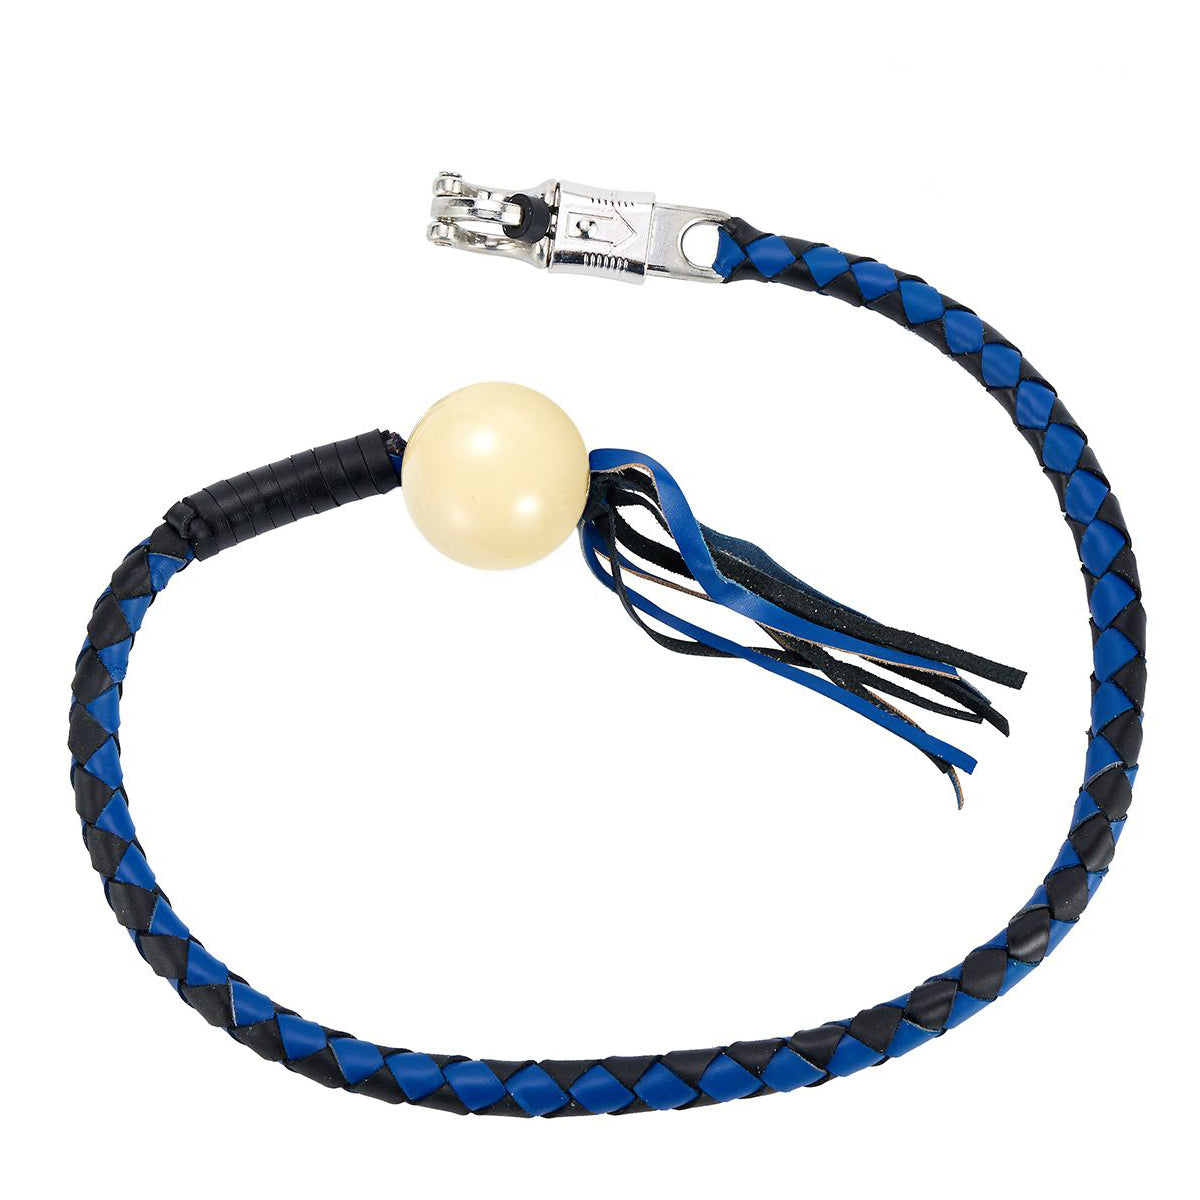 Black And Blue Fringed Get Back Whip With Pool White Ball